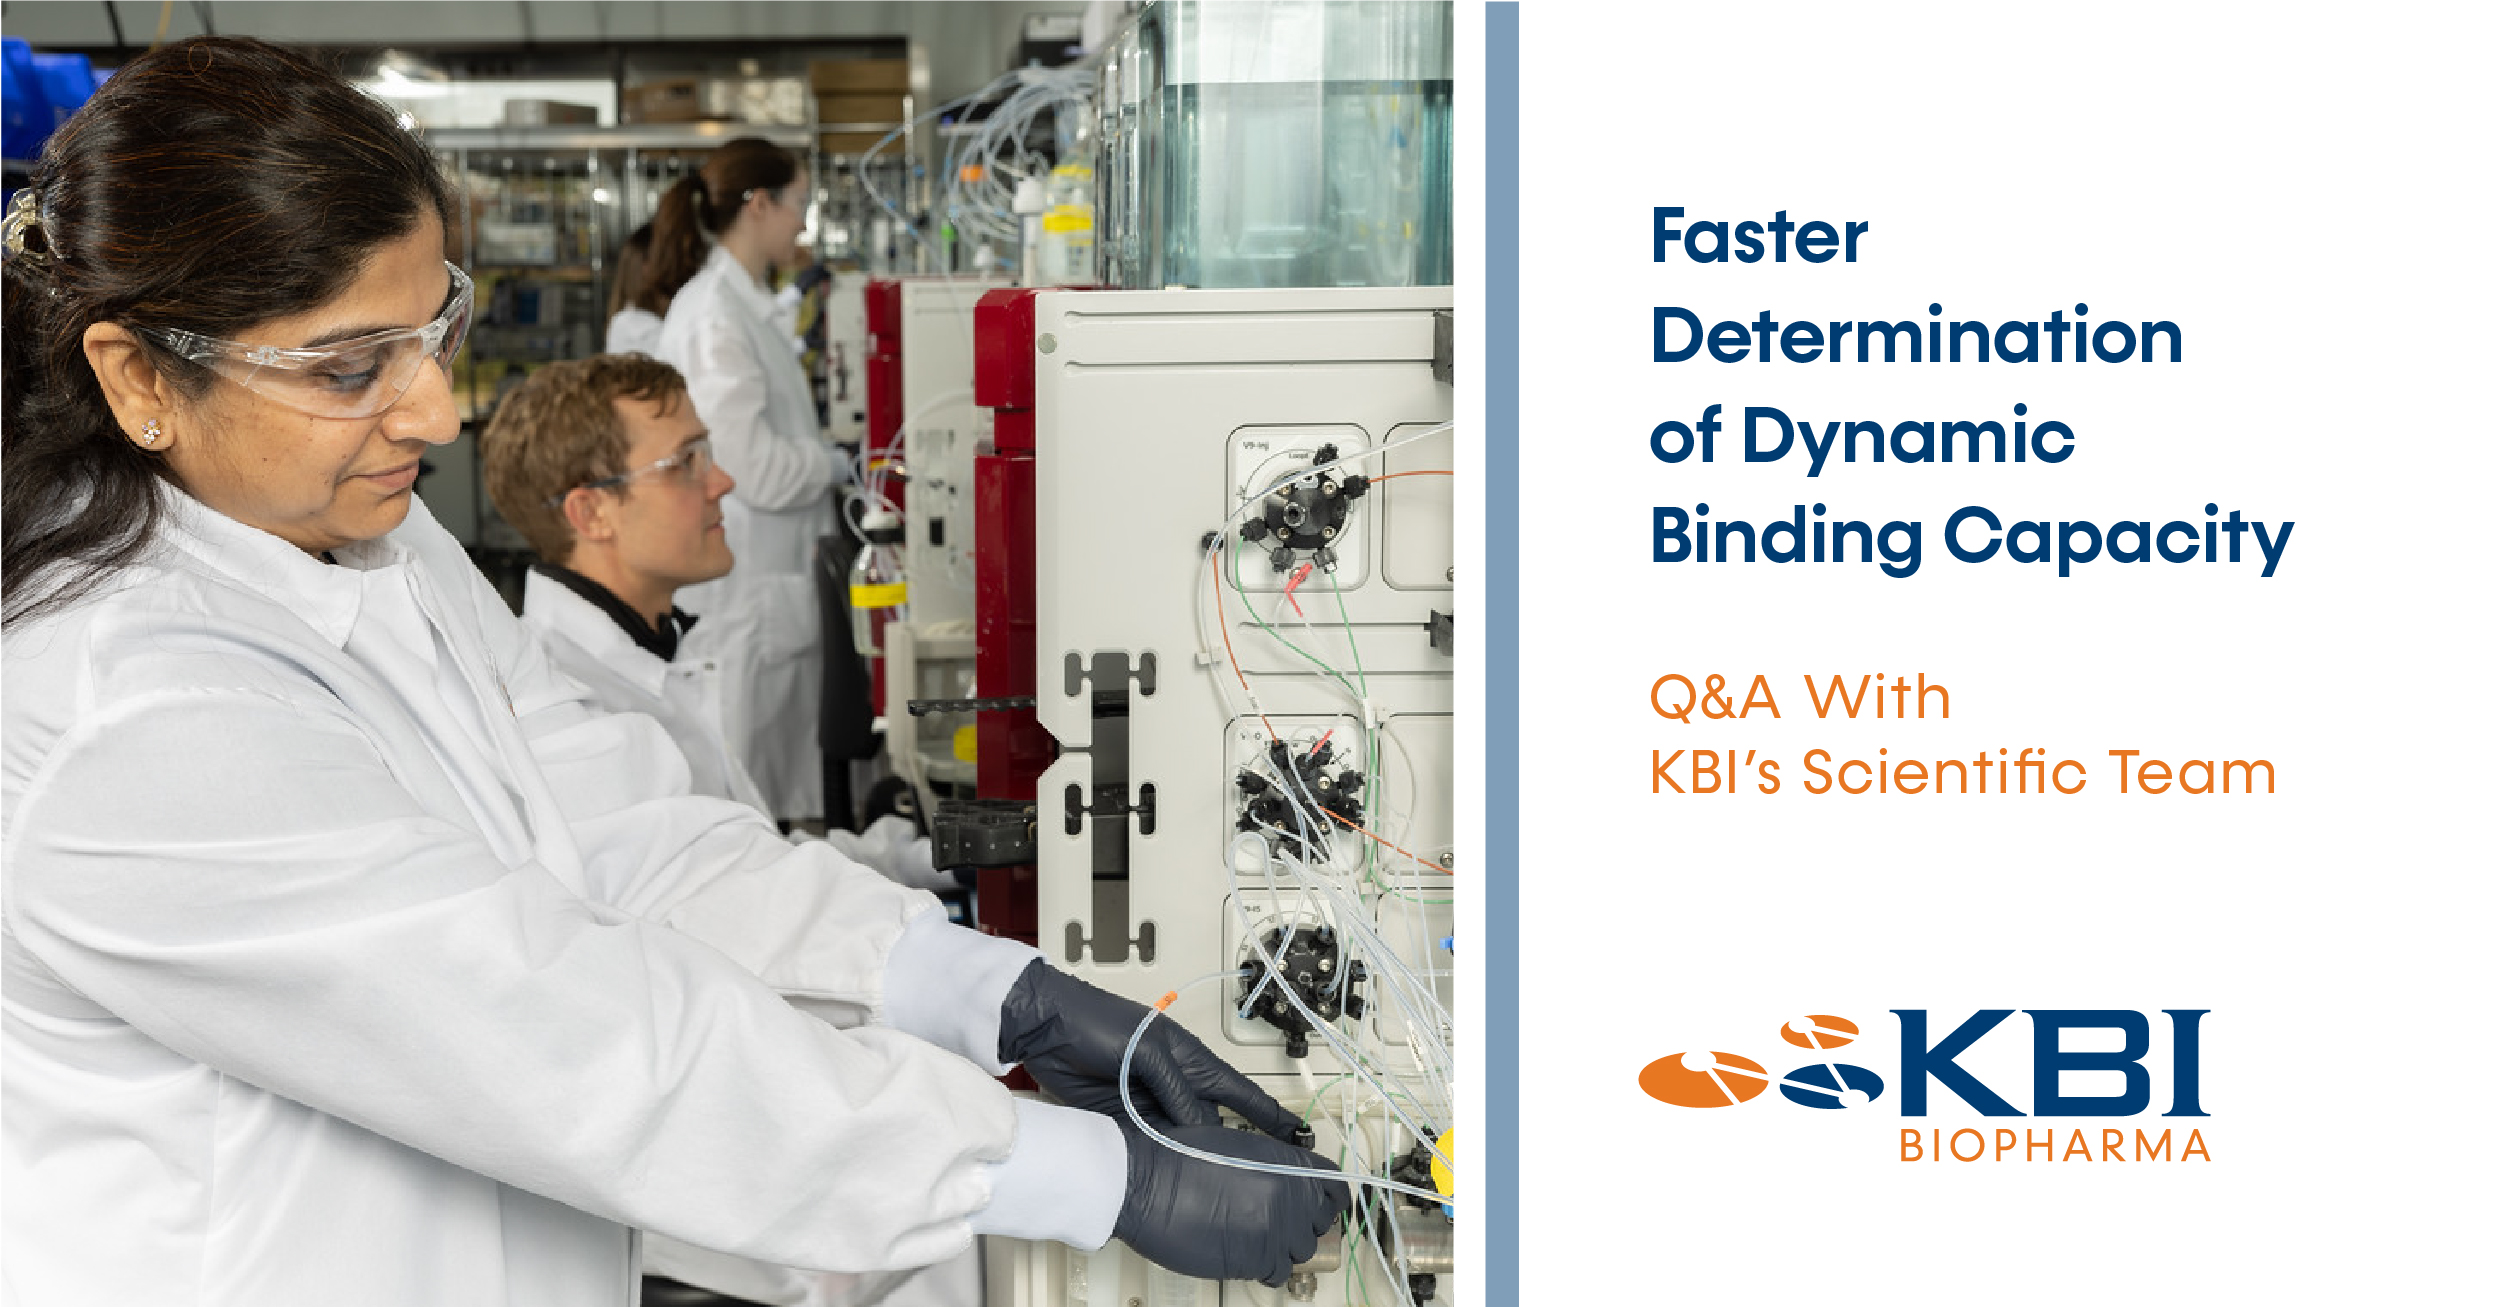 Faster Determination of Dynamic Binding Capacity – Q&A With KBI’s Scientific Team